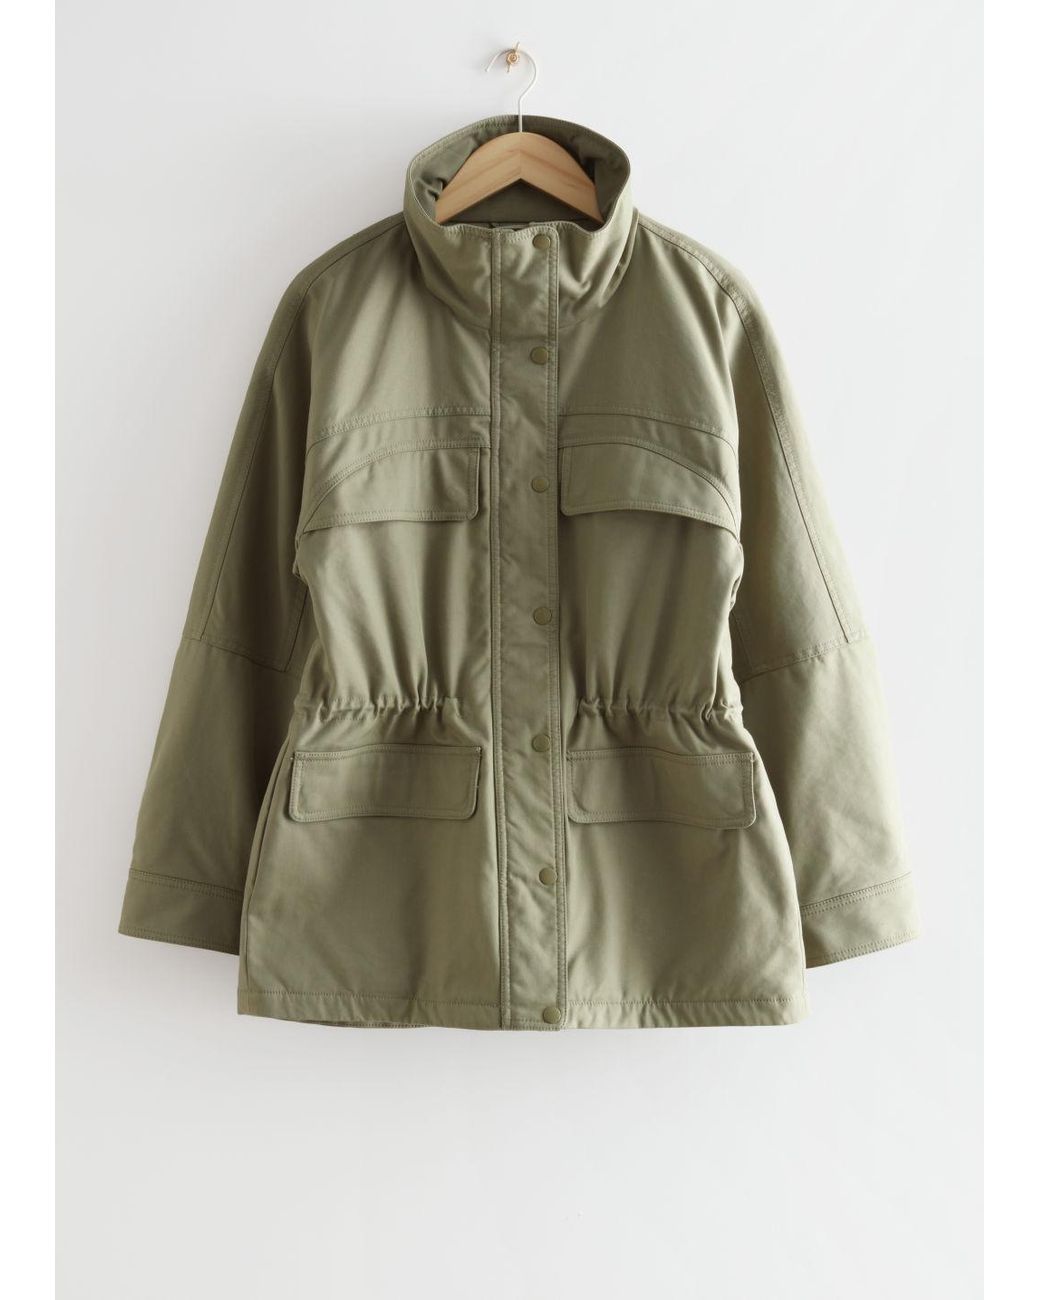 & Other Stories Oversized Cotton Jacket Green | Lyst